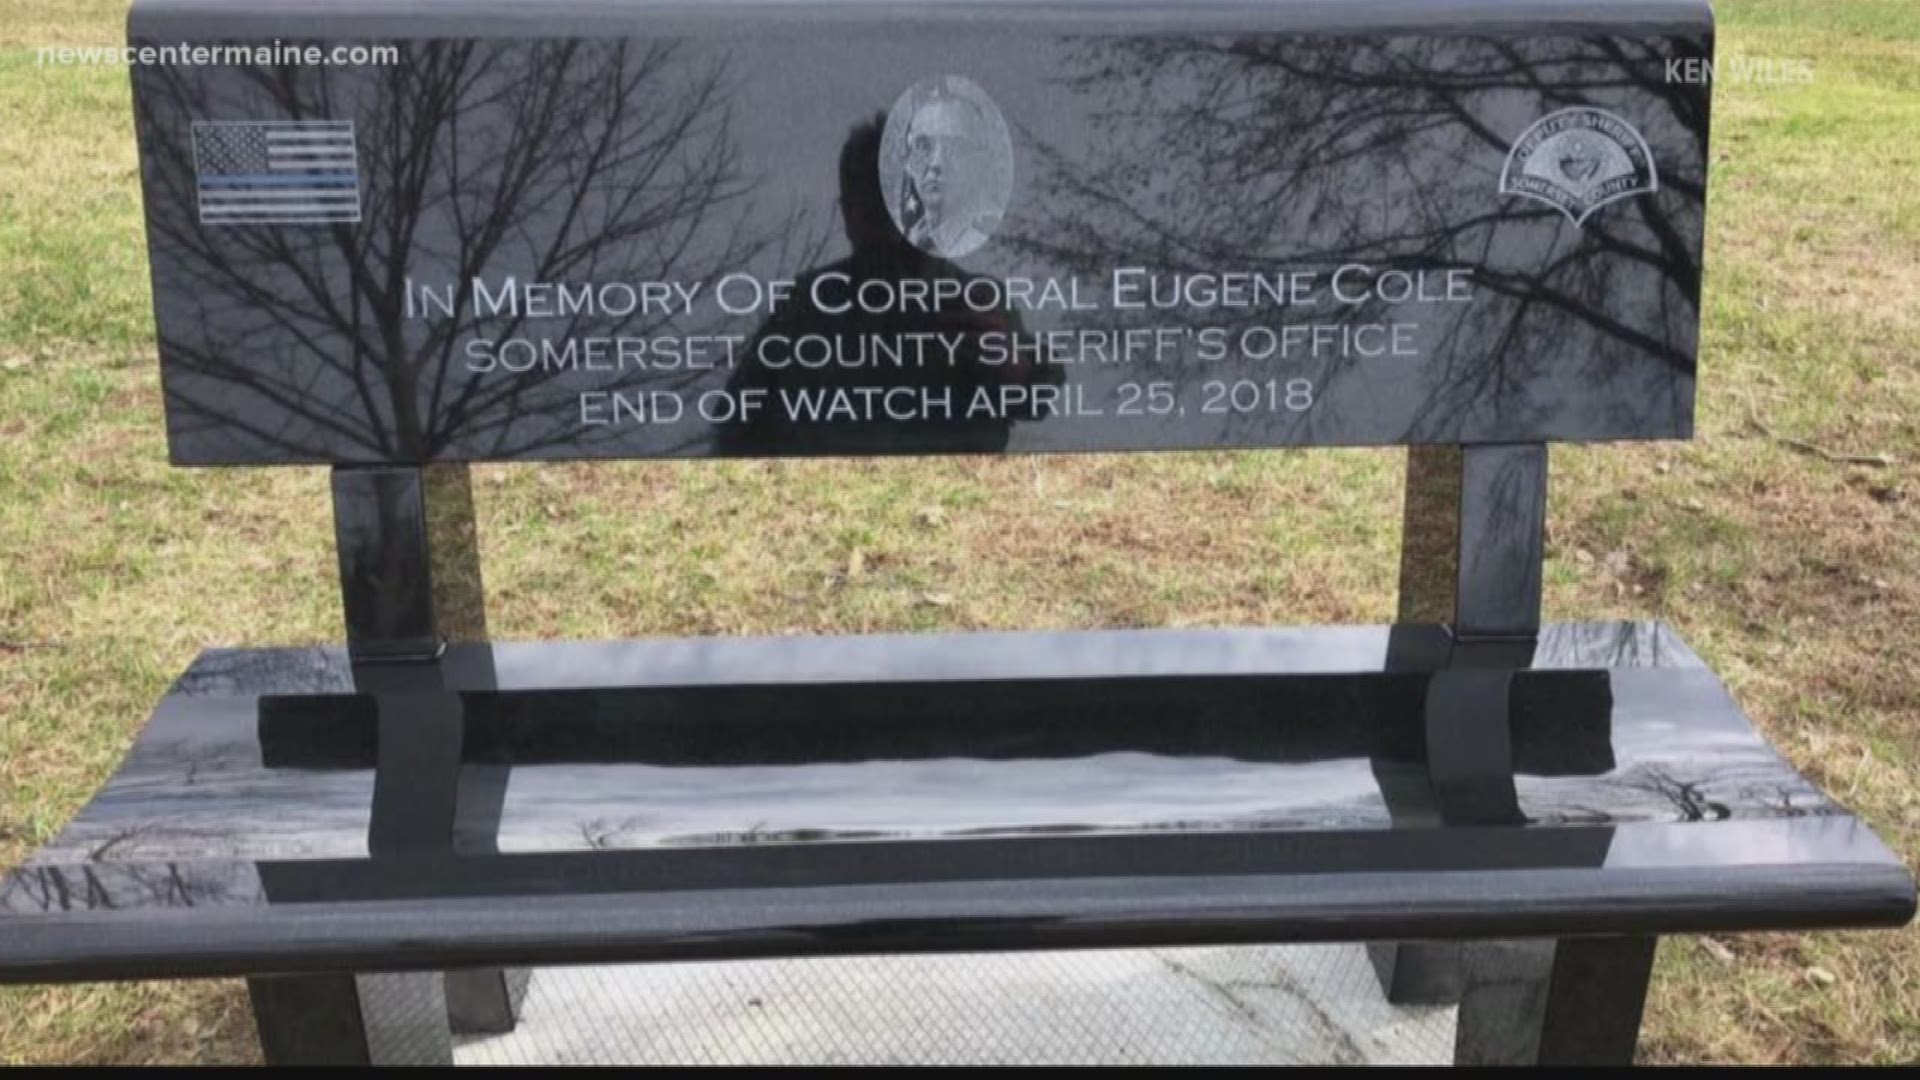 The town of Norridgewock installed a bench in Cpl. Eugene Cole's honor.